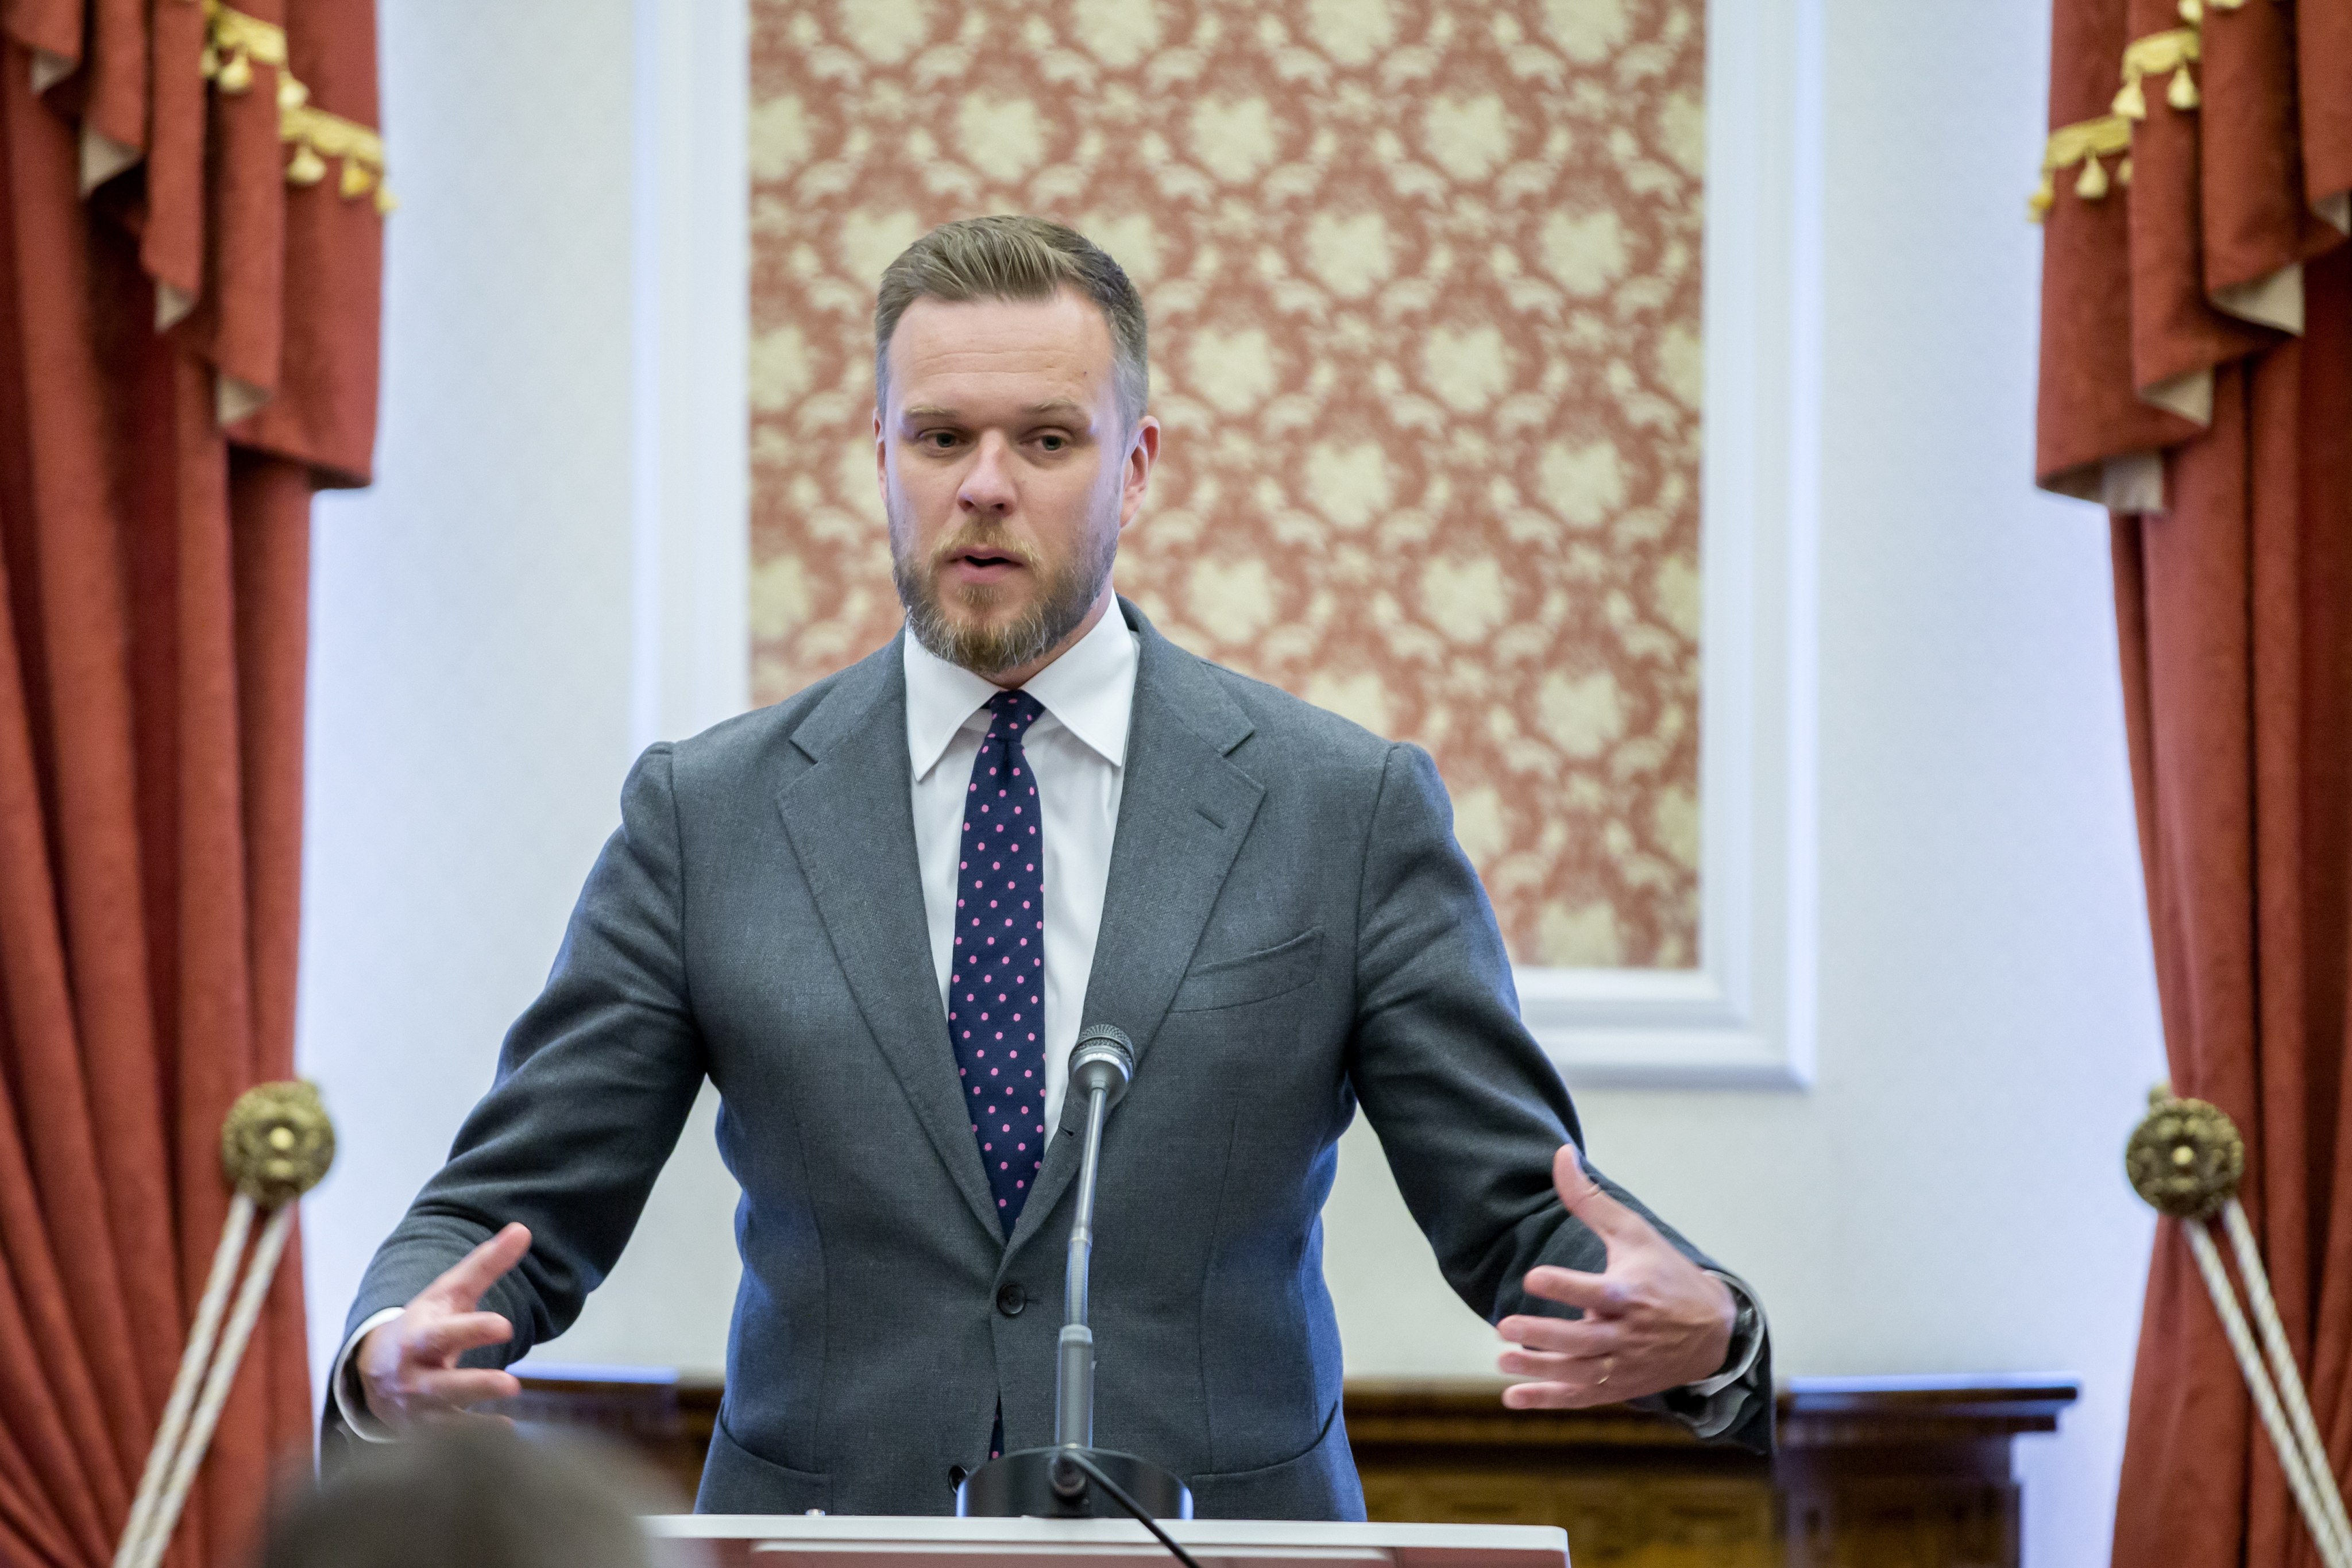 Lithuanian Foreign Minister Gabrielius Landsbergis says his country has “a story to tell” about being victimised by major powers. Photo: EPA-EFE